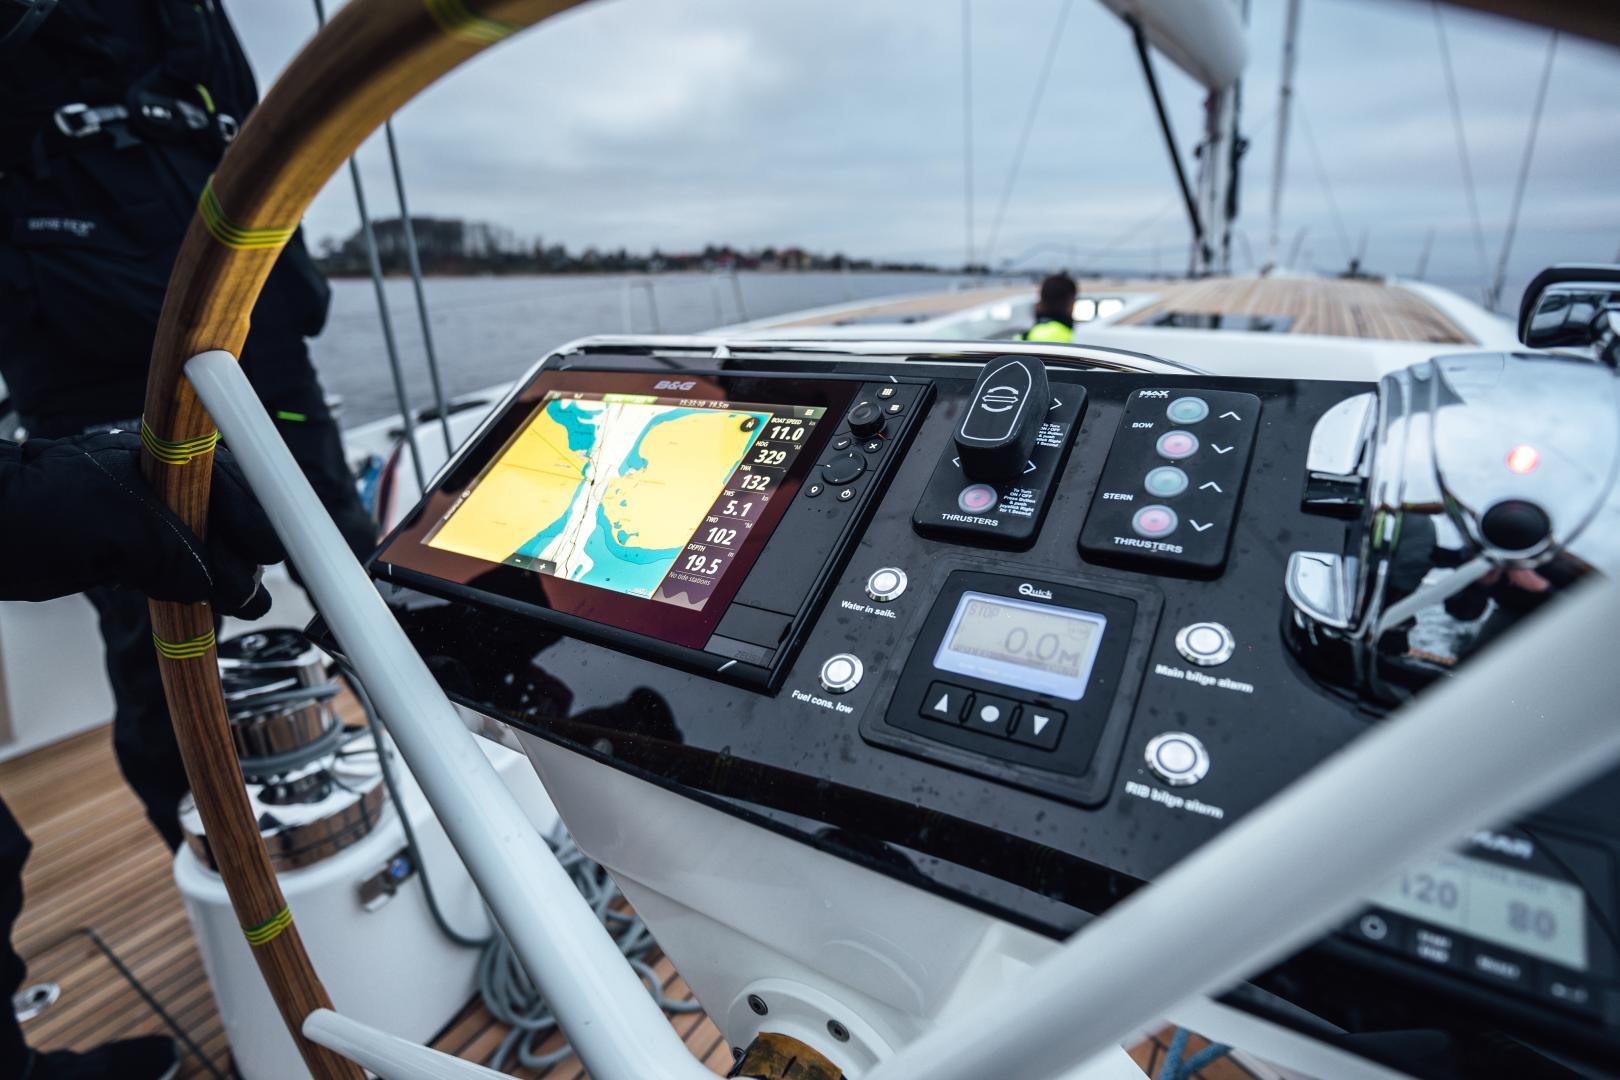 All manoeuvres can be done singlehanded from the helm at the touch of a button